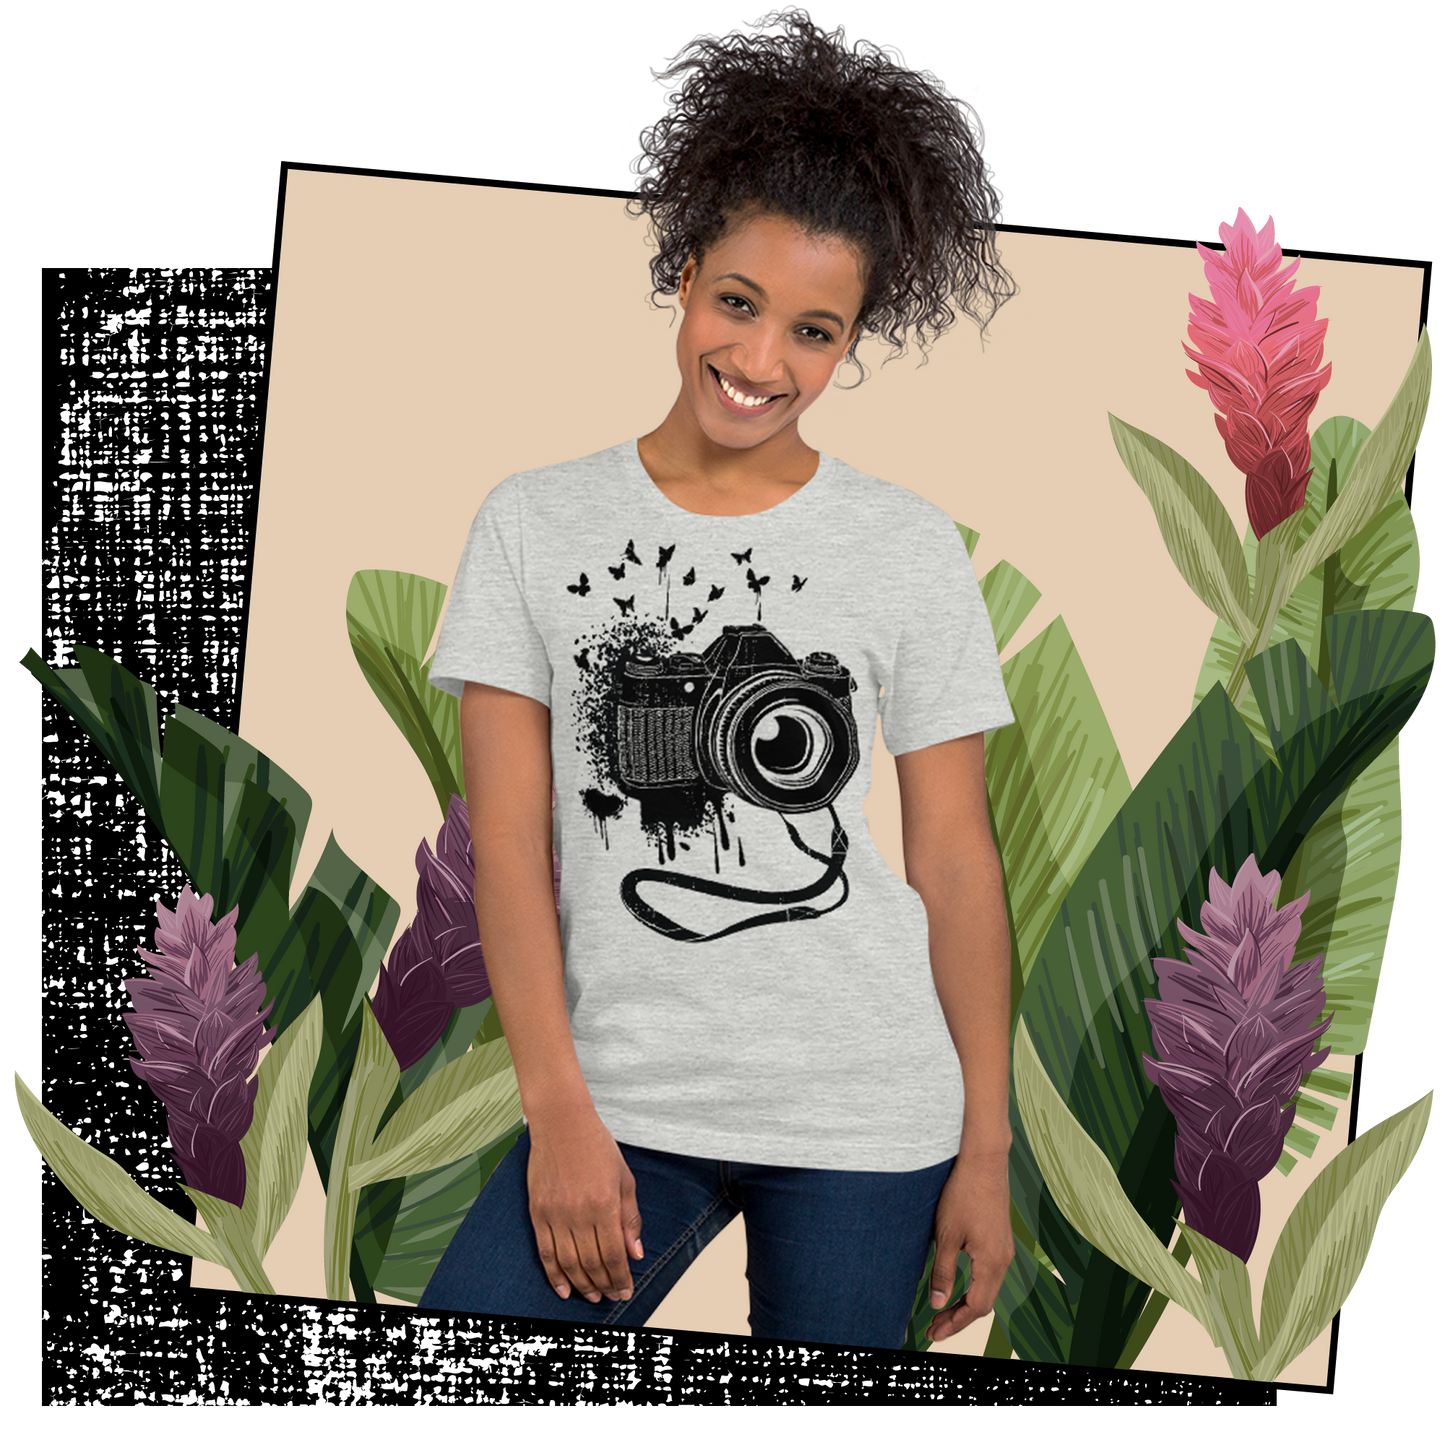 Retro Unisex T-Shirt - Vintage Camera and Butterflies Lifestyle 02